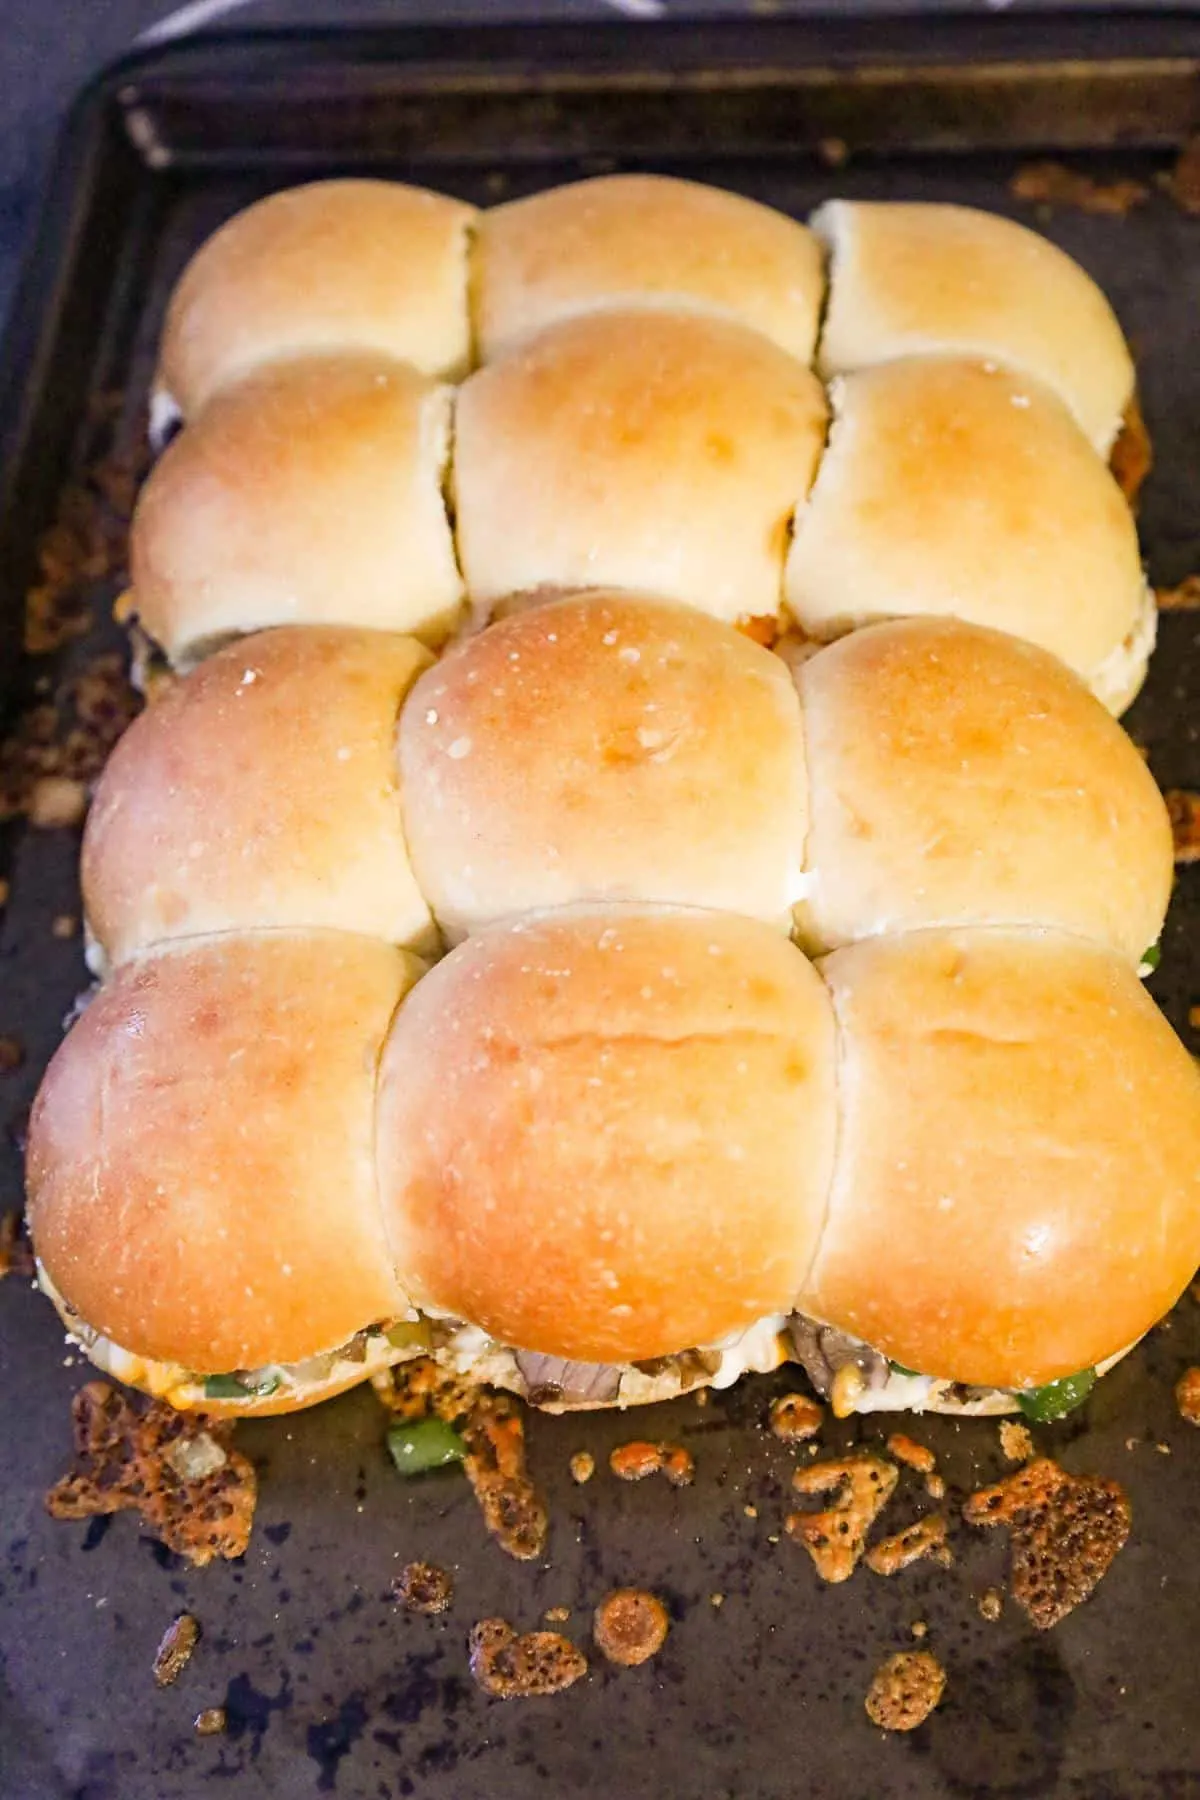 philly cheese steak sliders after baking for 12 minutes